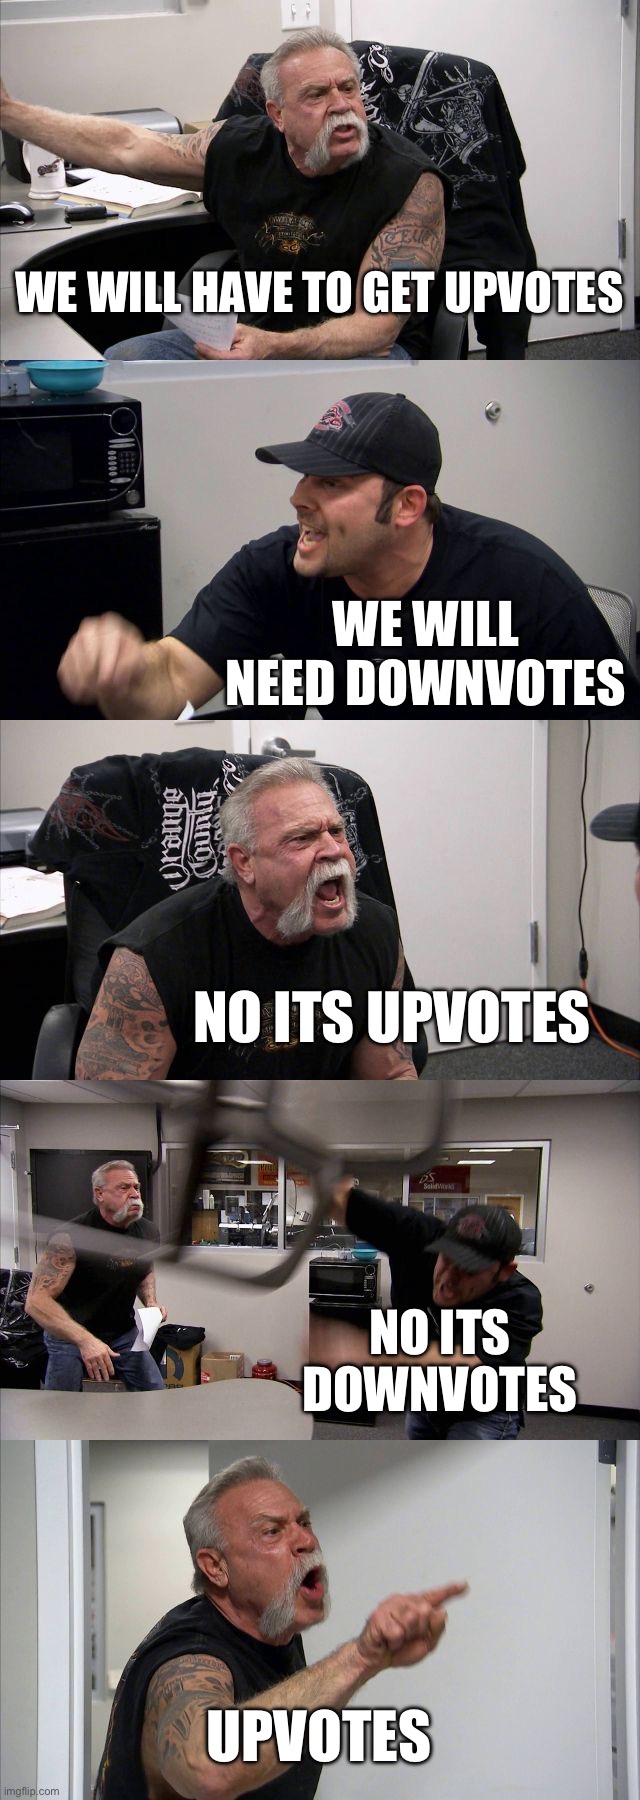 IM ON UPVOTES TEAM. WHAT TEAM ARE U ON? | WE WILL HAVE TO GET UPVOTES; WE WILL NEED DOWNVOTES; NO ITS UPVOTES; NO ITS DOWNVOTES; UPVOTES | image tagged in memes,american chopper argument,upvotes,downvote | made w/ Imgflip meme maker